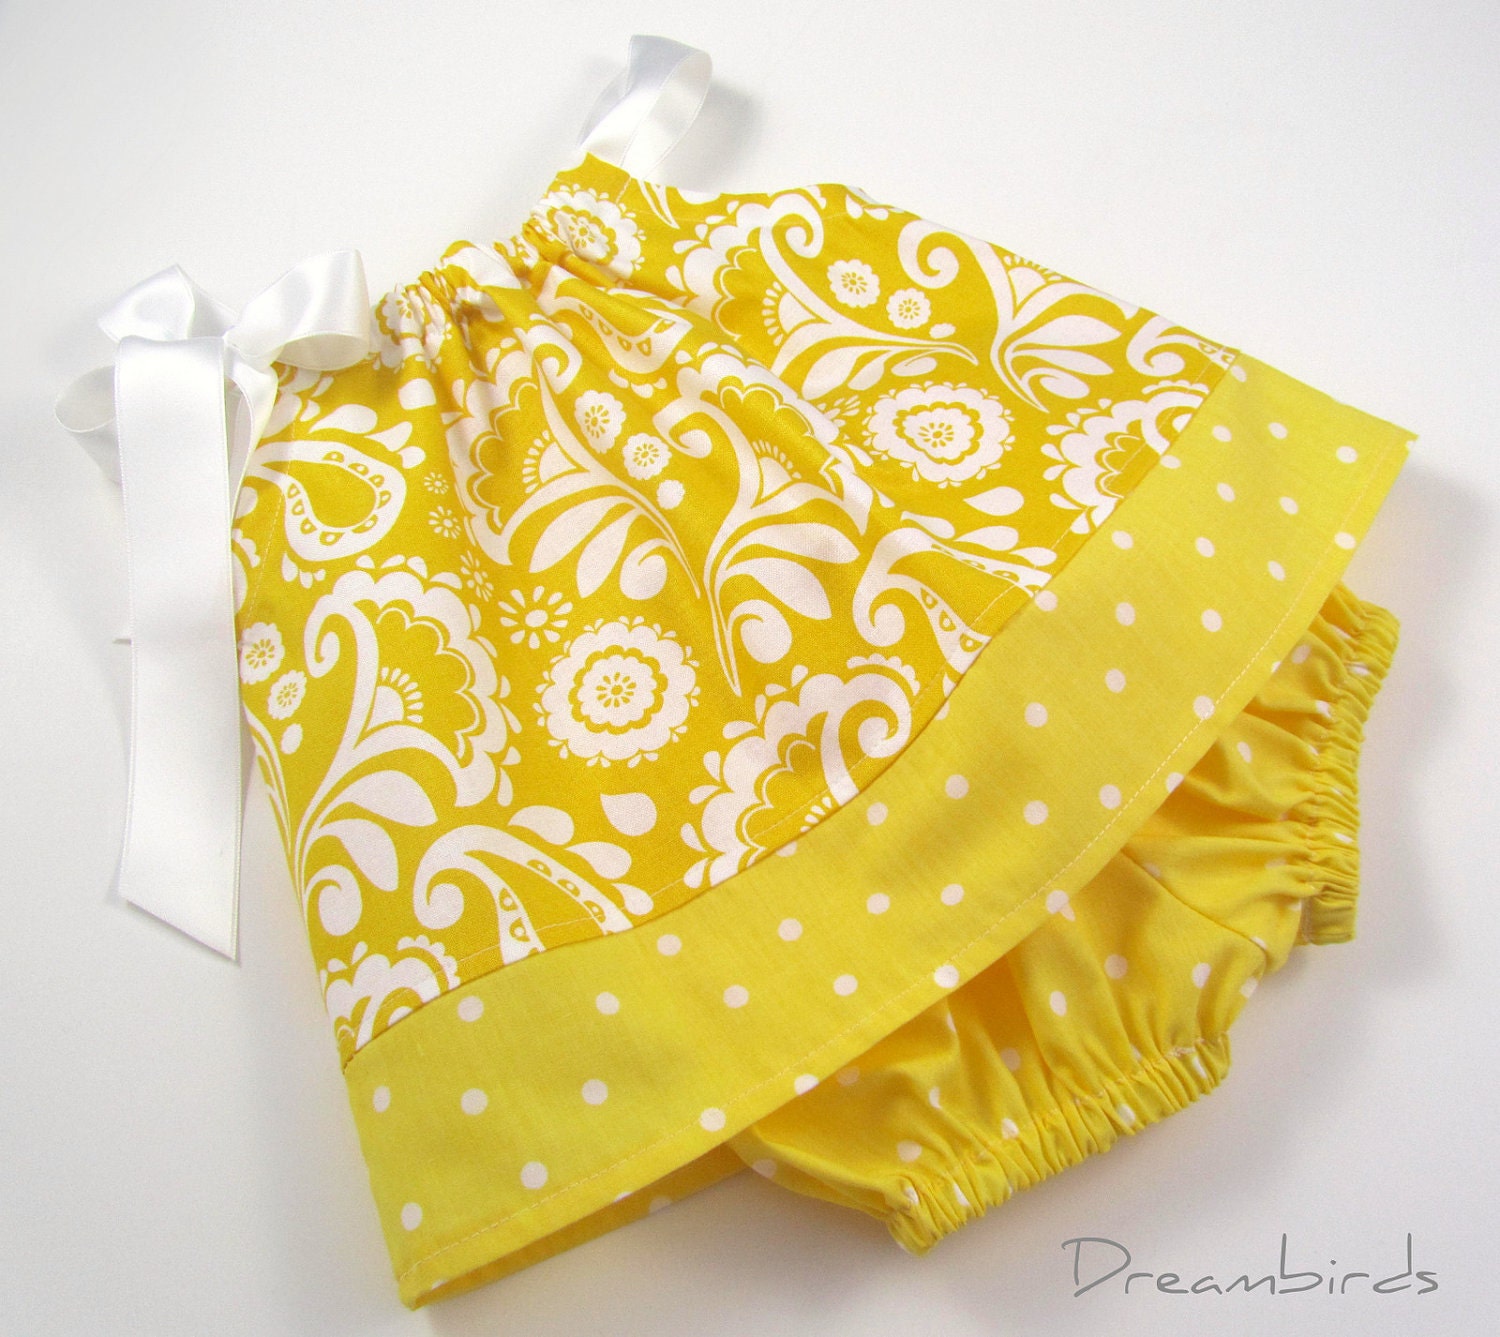 Infant Dress and Bloomers Outfit - Sunny Yellow and Crisp White - in Size Newborn or 6 Months - dreambirds